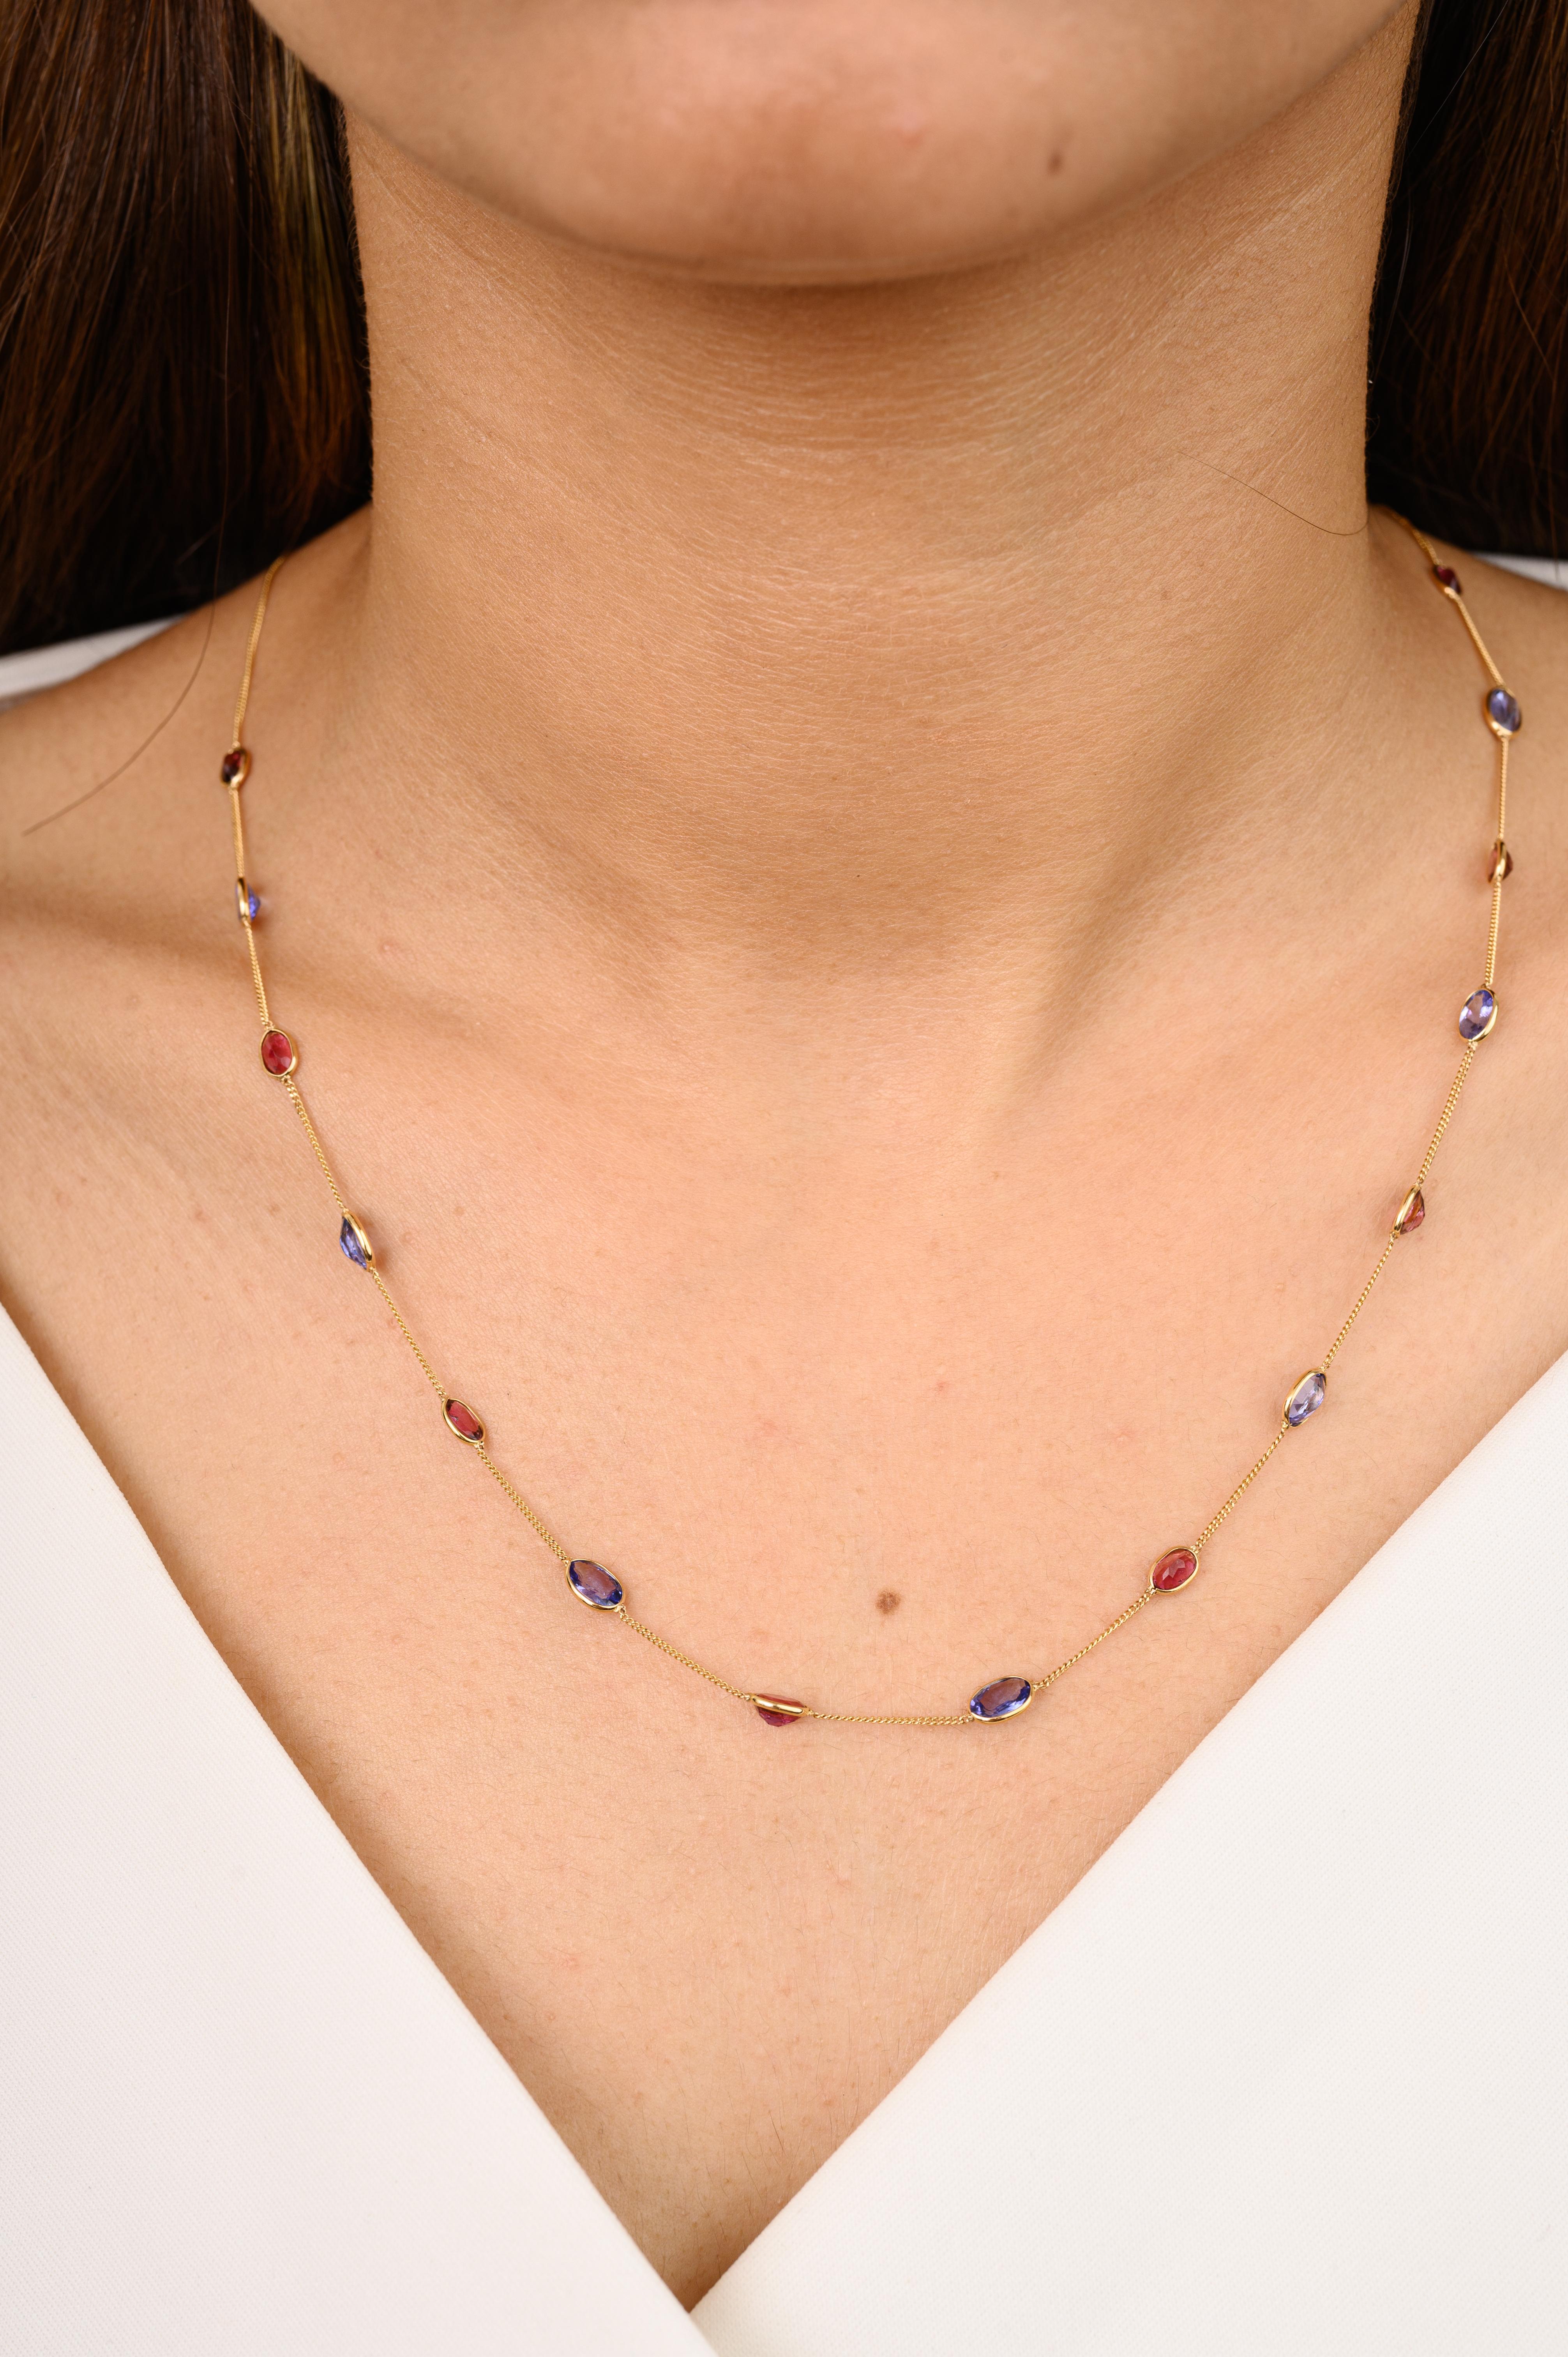 Oval Cut 18k Yellow Gold Tanzanite and Tourmaline Station Chain Necklace Gift for Women For Sale